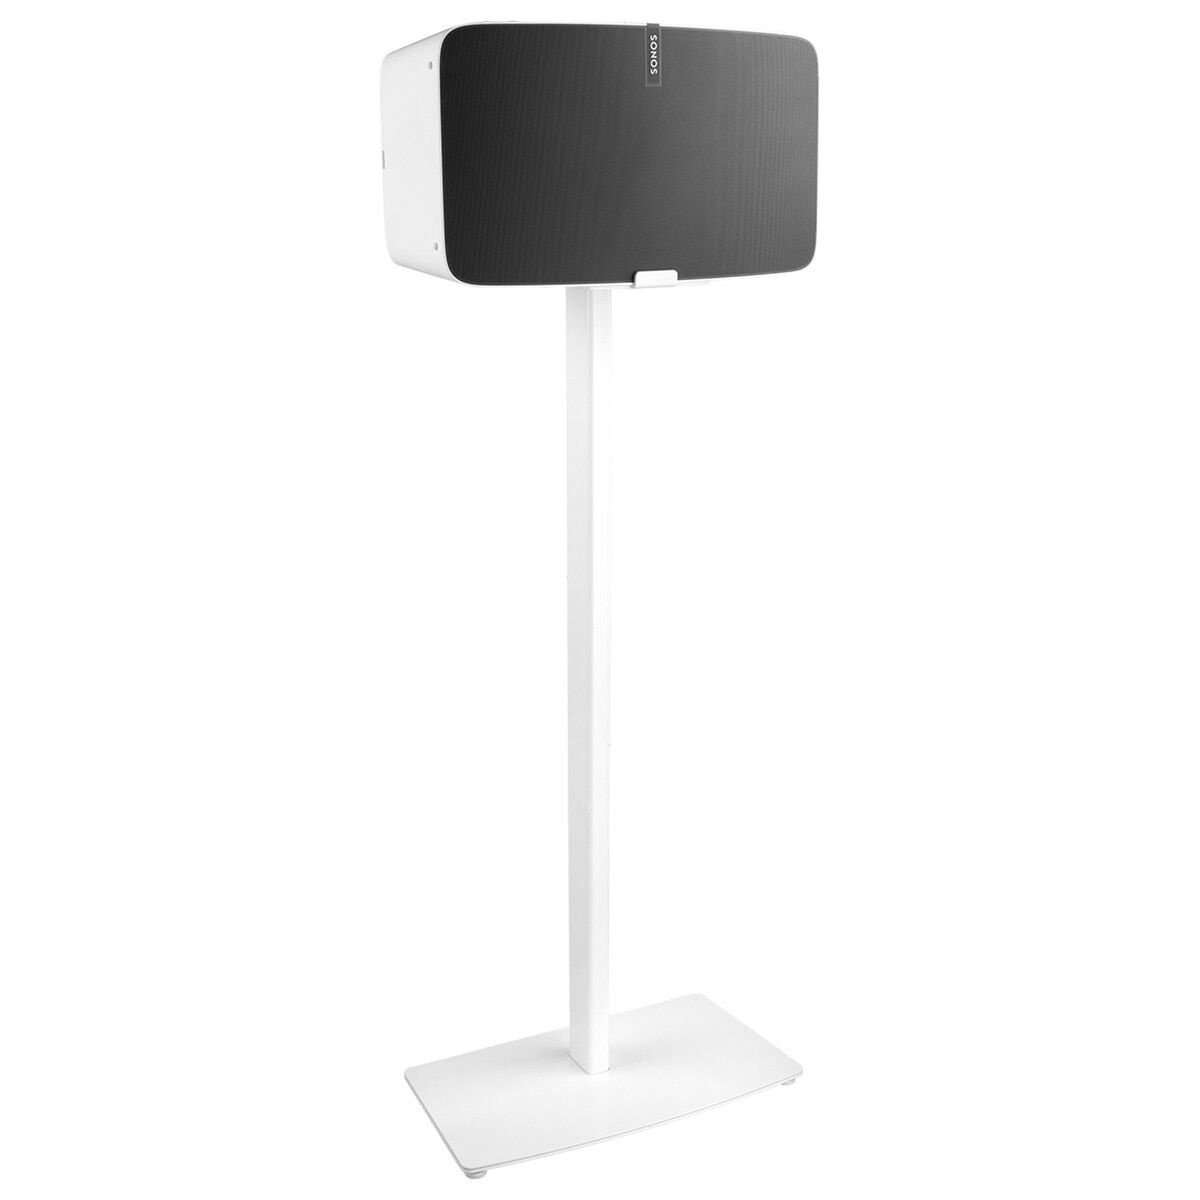 Speaker Stand Sonos Floor Stand White, Sonos, Electronics, Audio and Hi-Fi equipment, speaker-stand-sonos-floor-stand-white, Brand_Sonos, category-reference-2609, category-reference-2637, category-reference-2882, category-reference-t-19653, category-reference-t-19899, category-reference-t-21329, category-reference-t-25554, category-reference-t-7441, cinema and television, Condition_NEW, music, Price_100 - 200, RiotNook